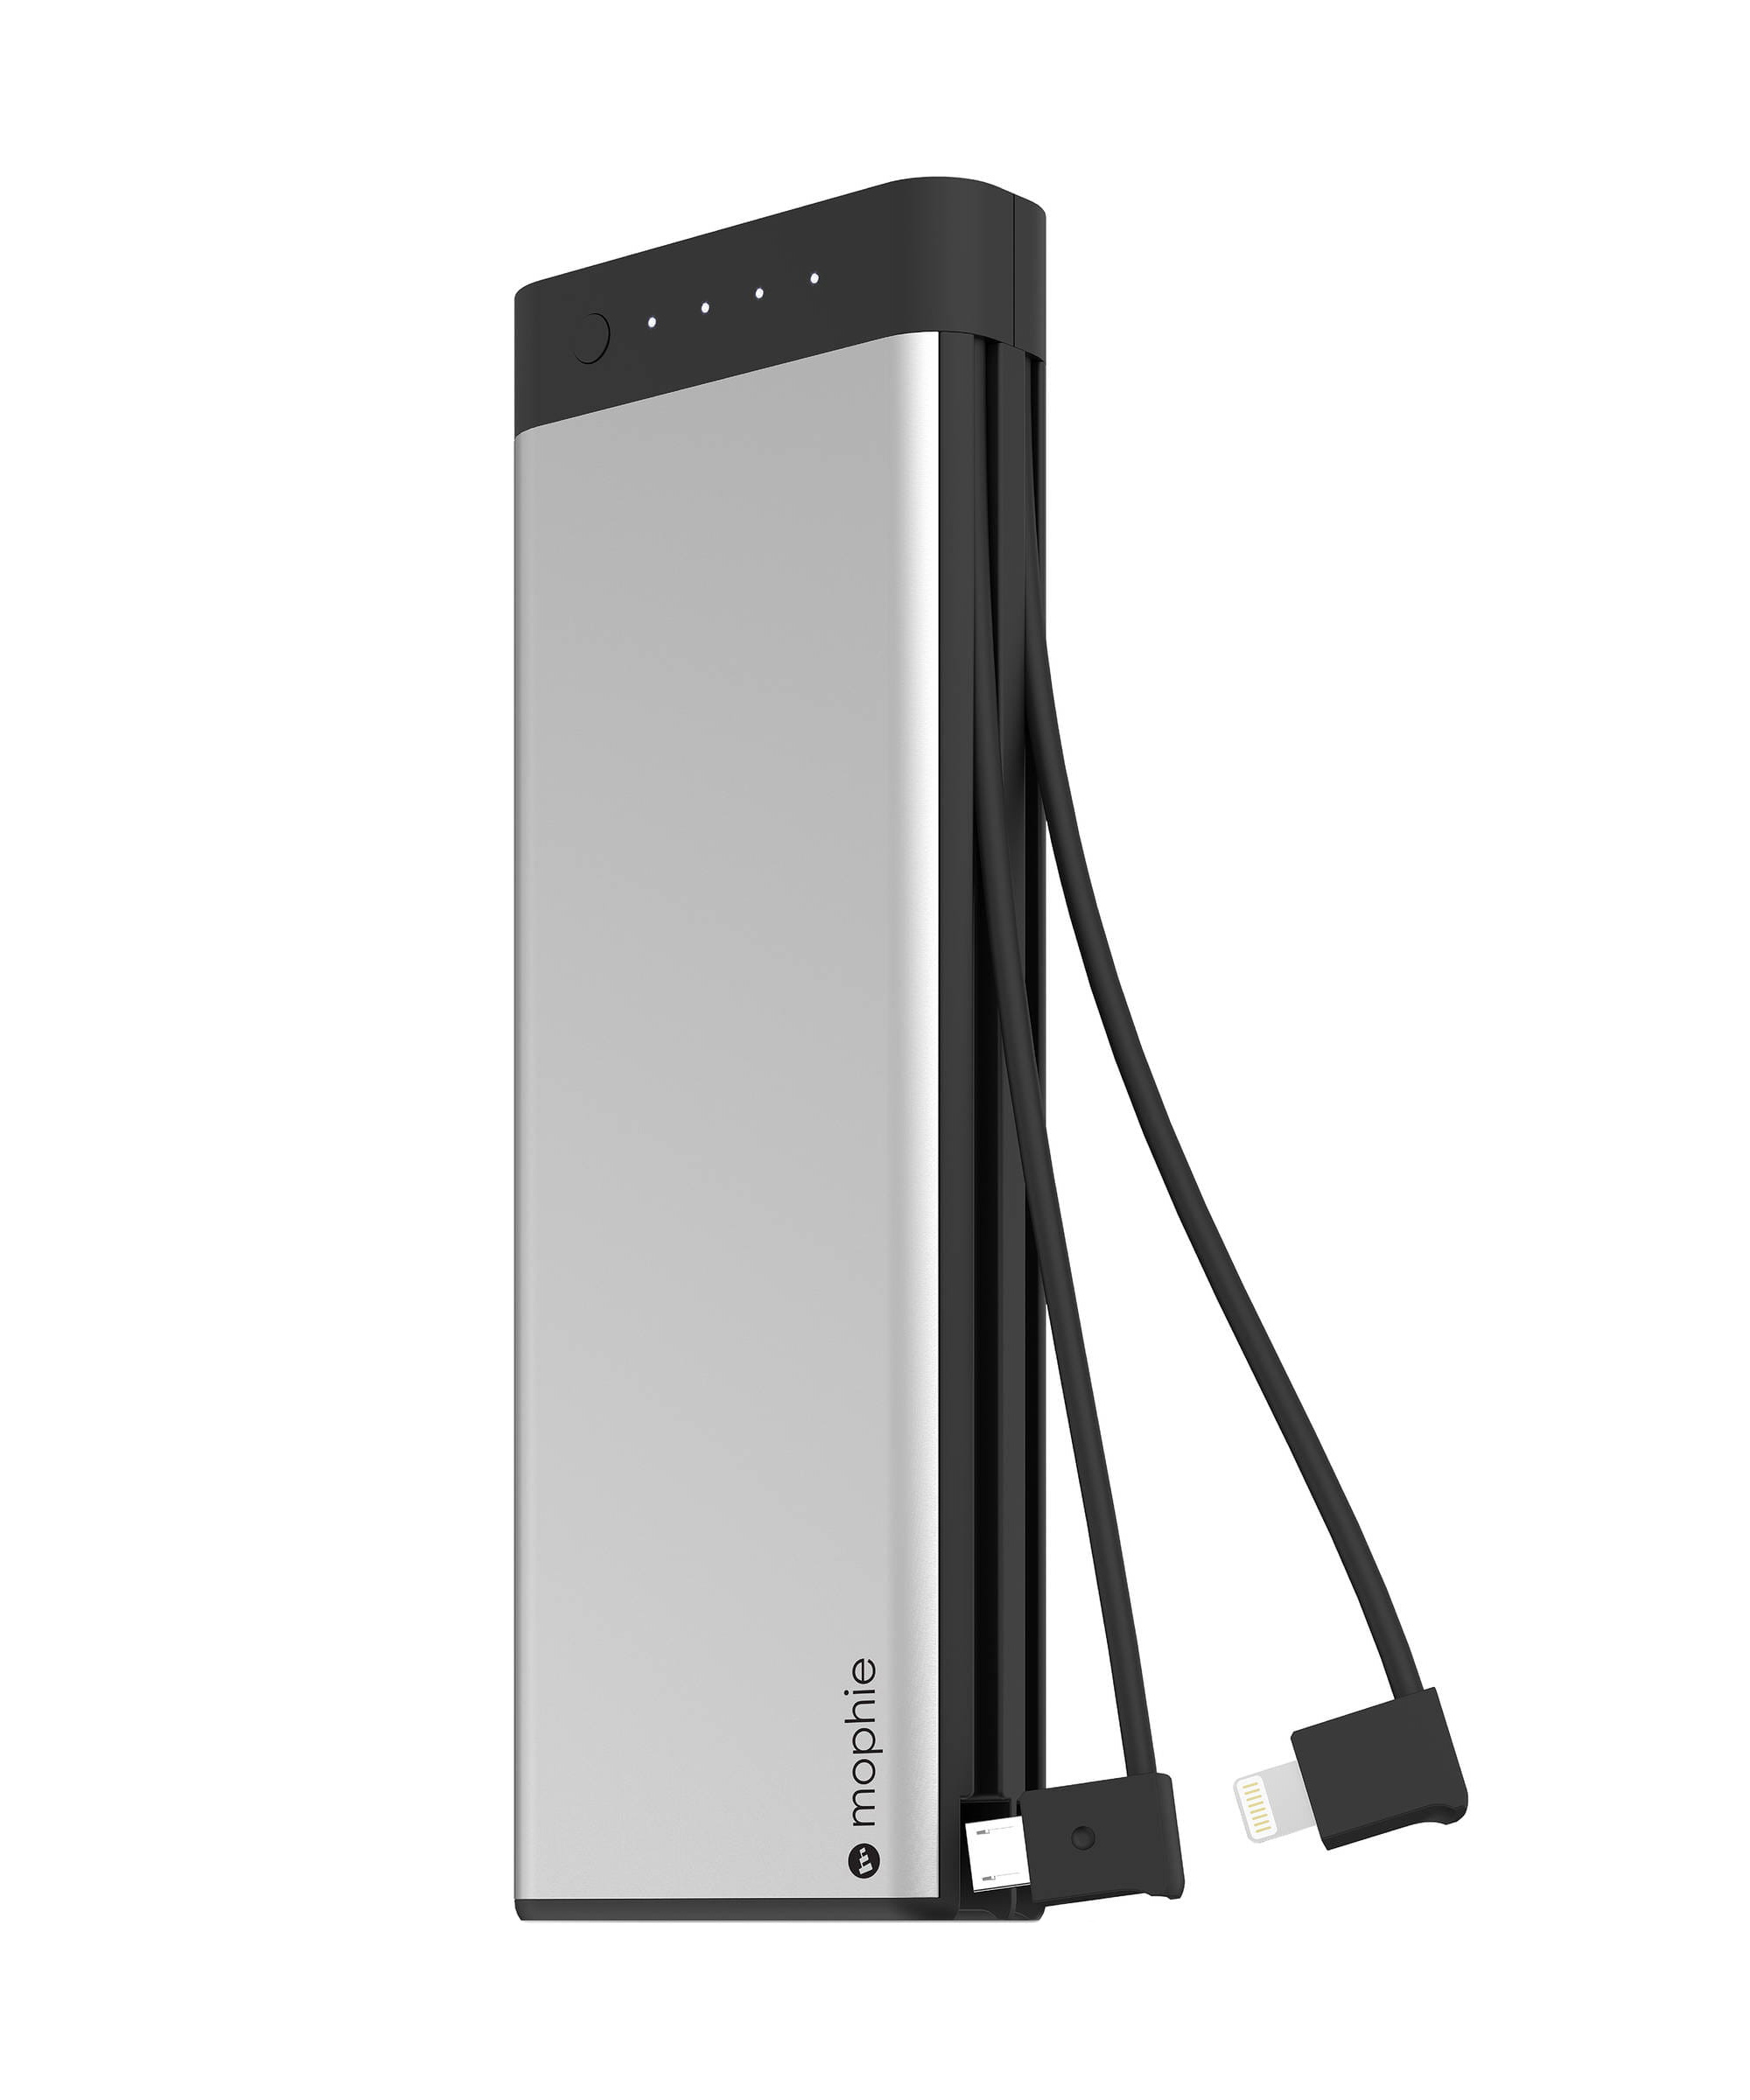 Mophie Portable Charger Plus 20K